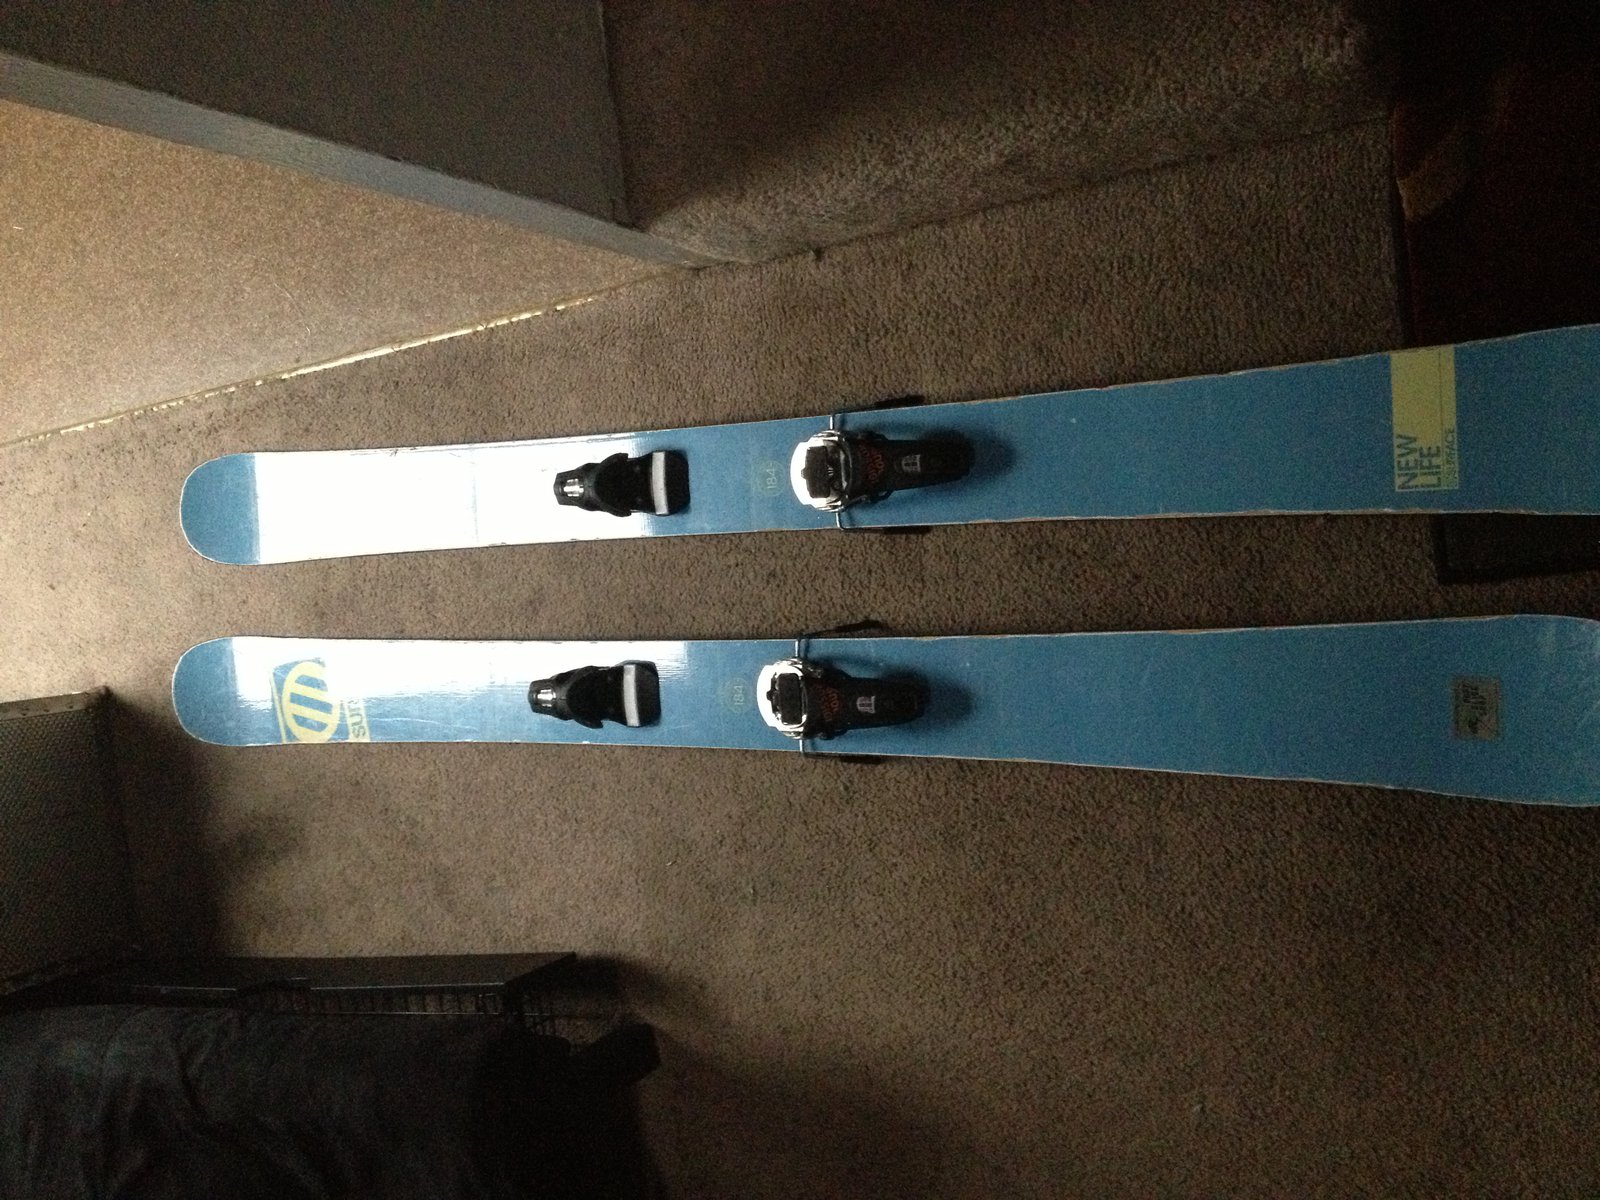 FS: Surface New lifes